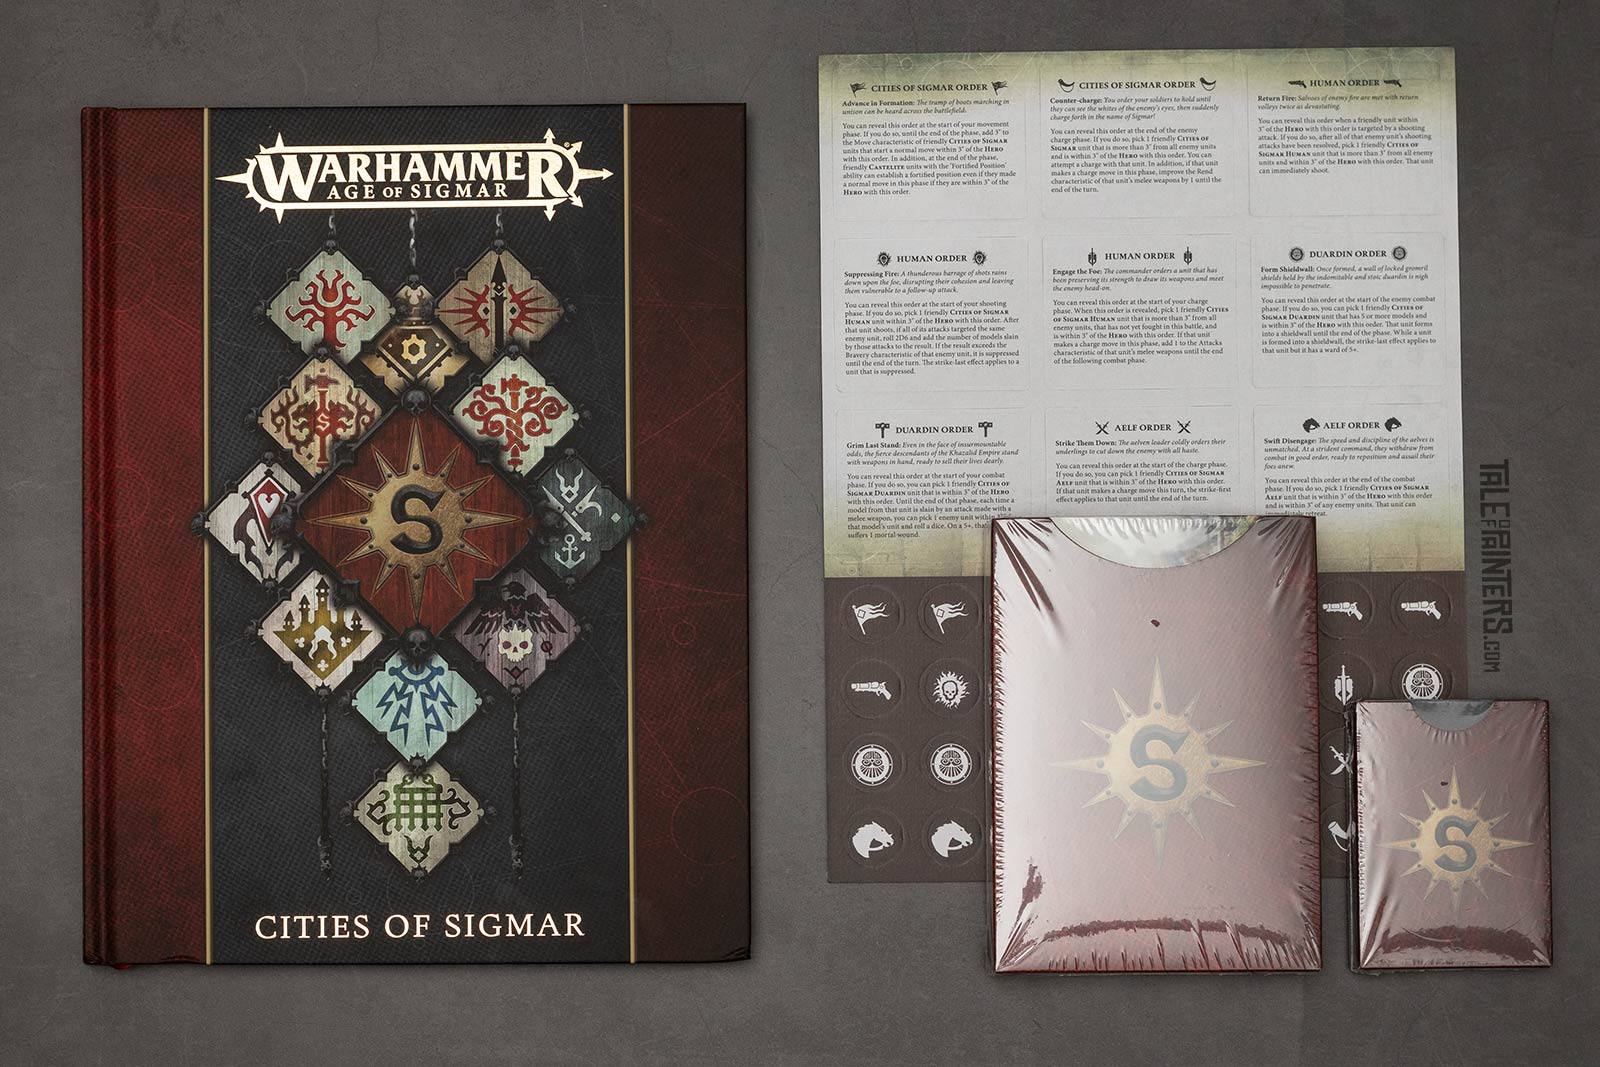 Battletome, cards and counters from Stahly's Cities of Sigmar army set review